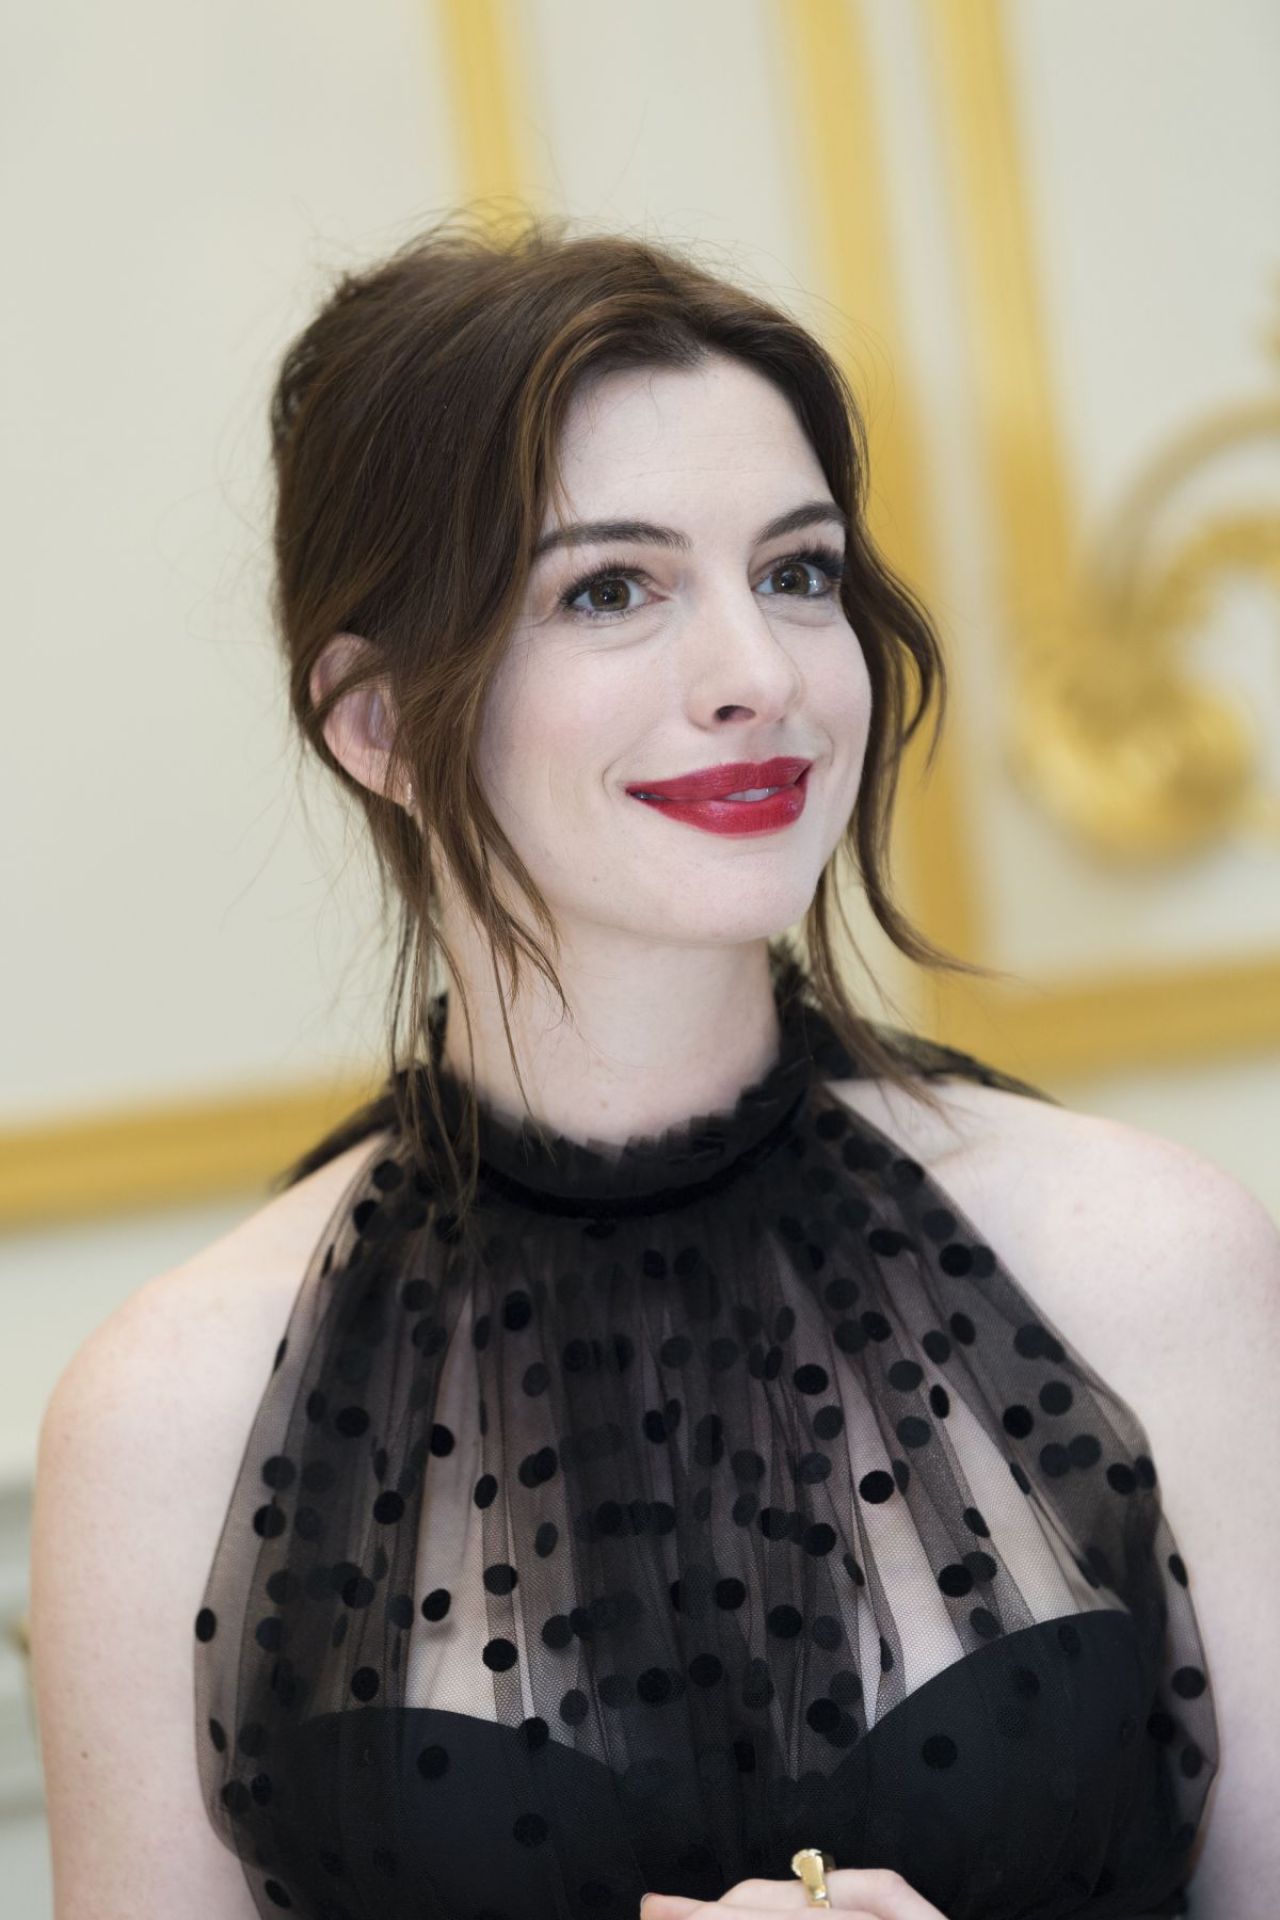 Anne Hathaway - "The Hustle" Press Conference in NY
